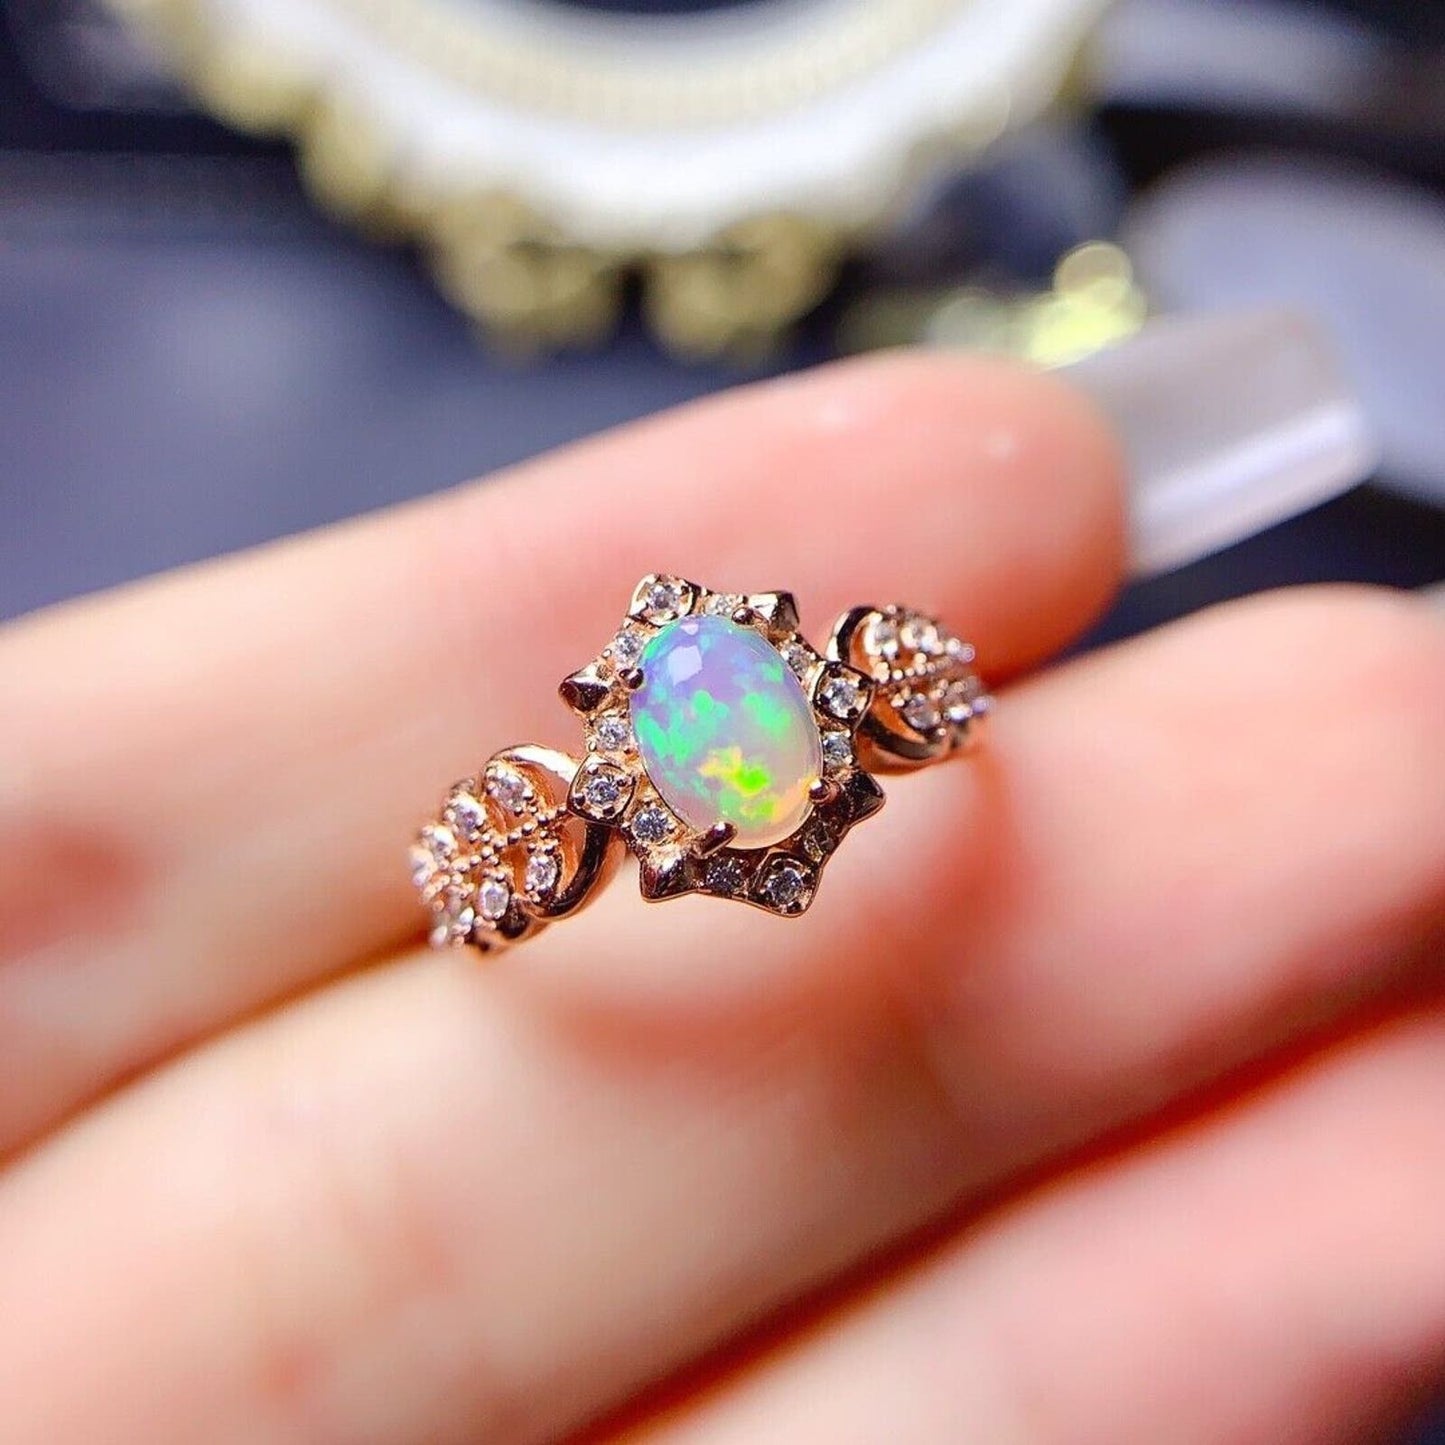 Fire Opal Lace Cocktail Ring 5x7mm Sterling Silver